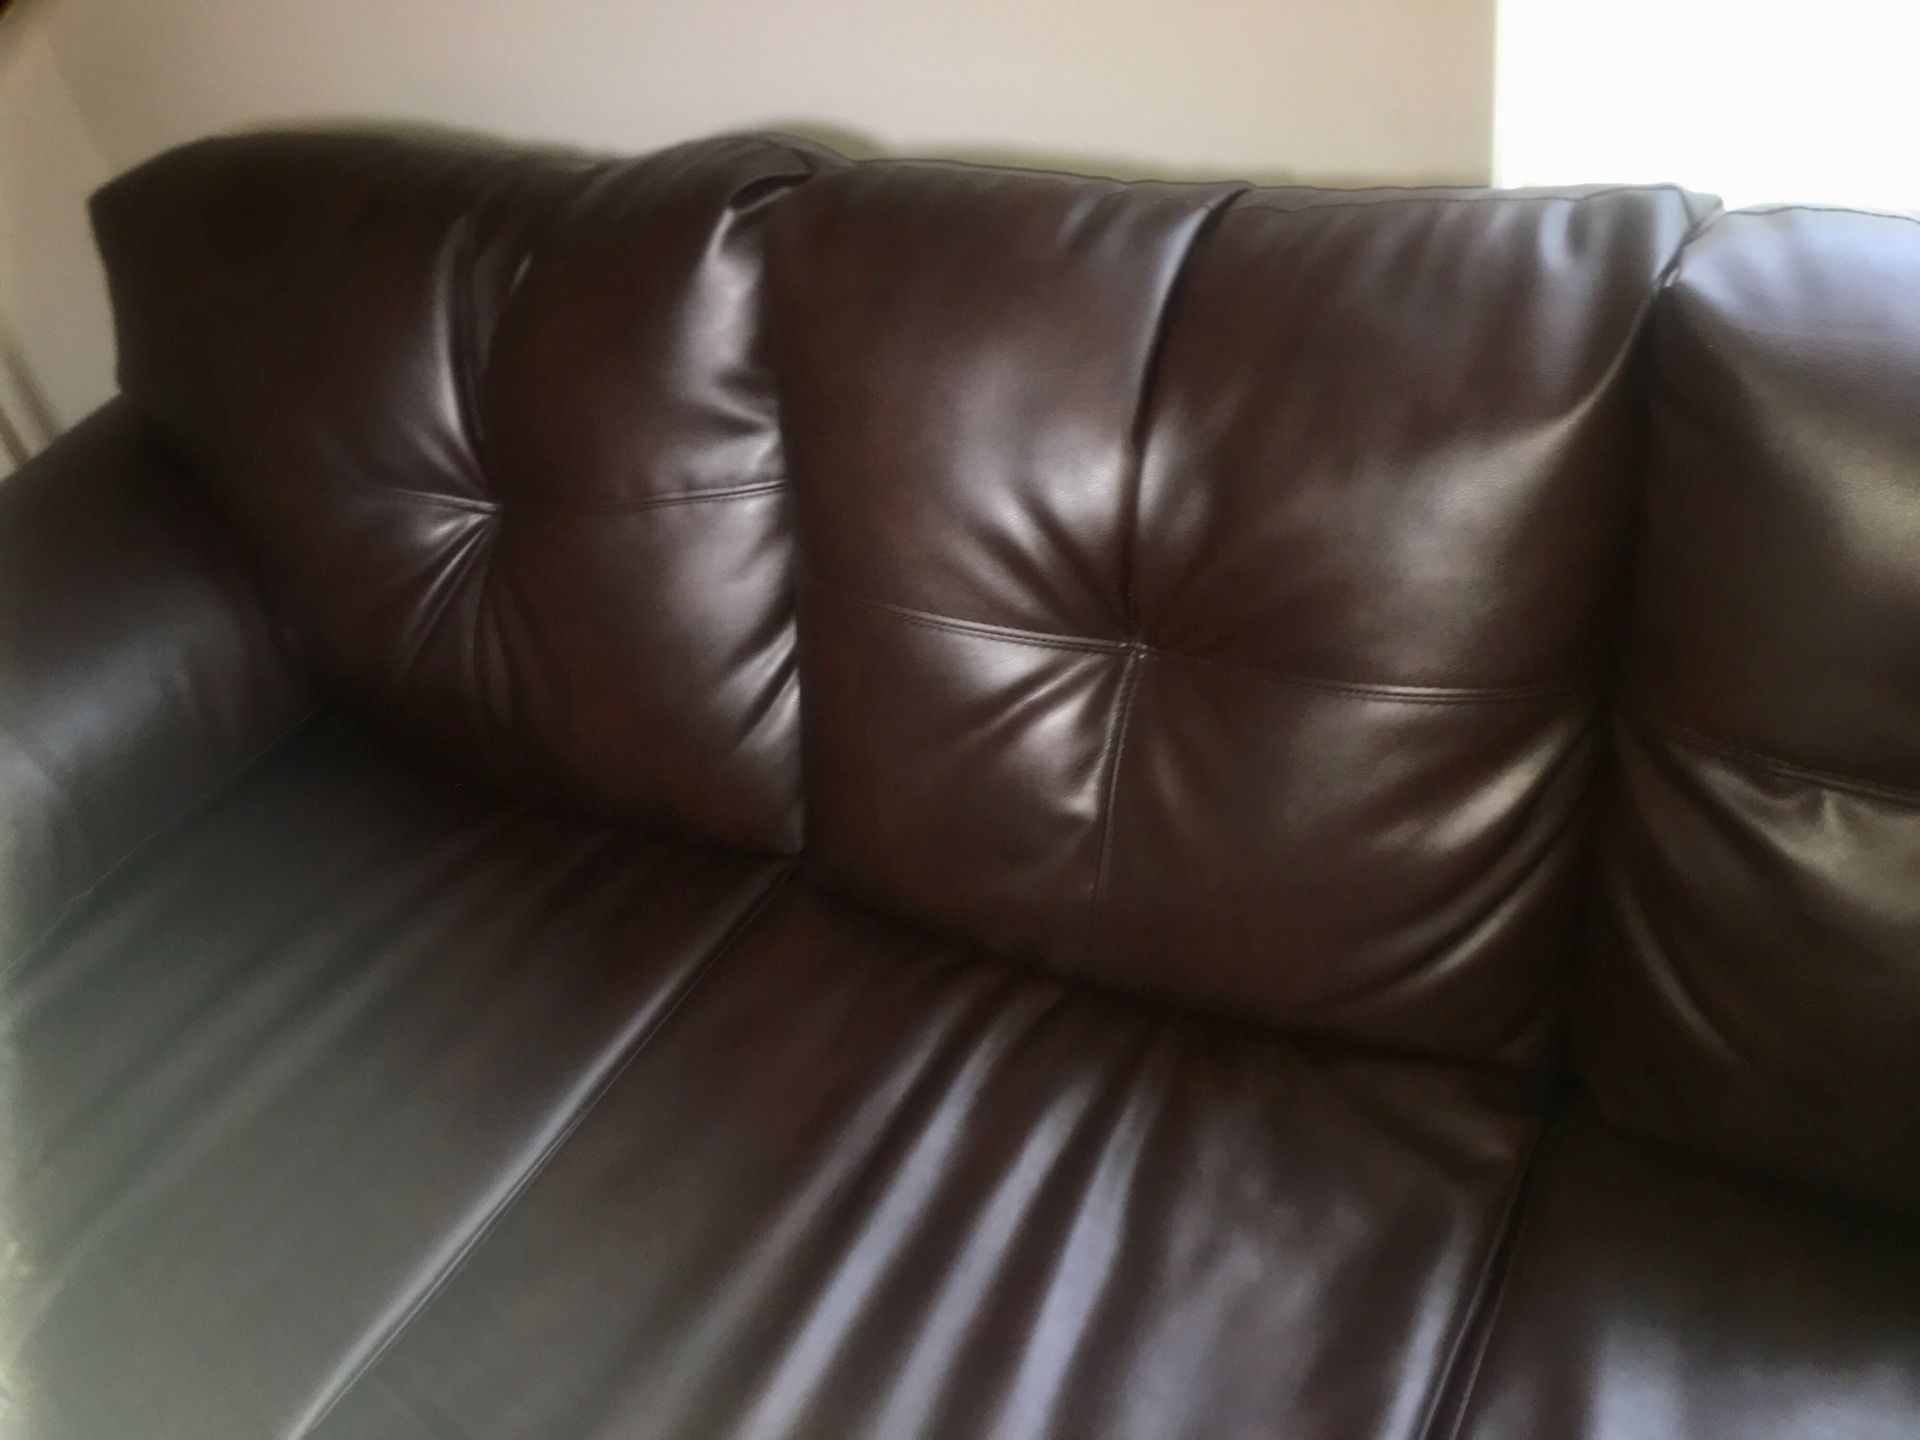 Sectional Leather Couch